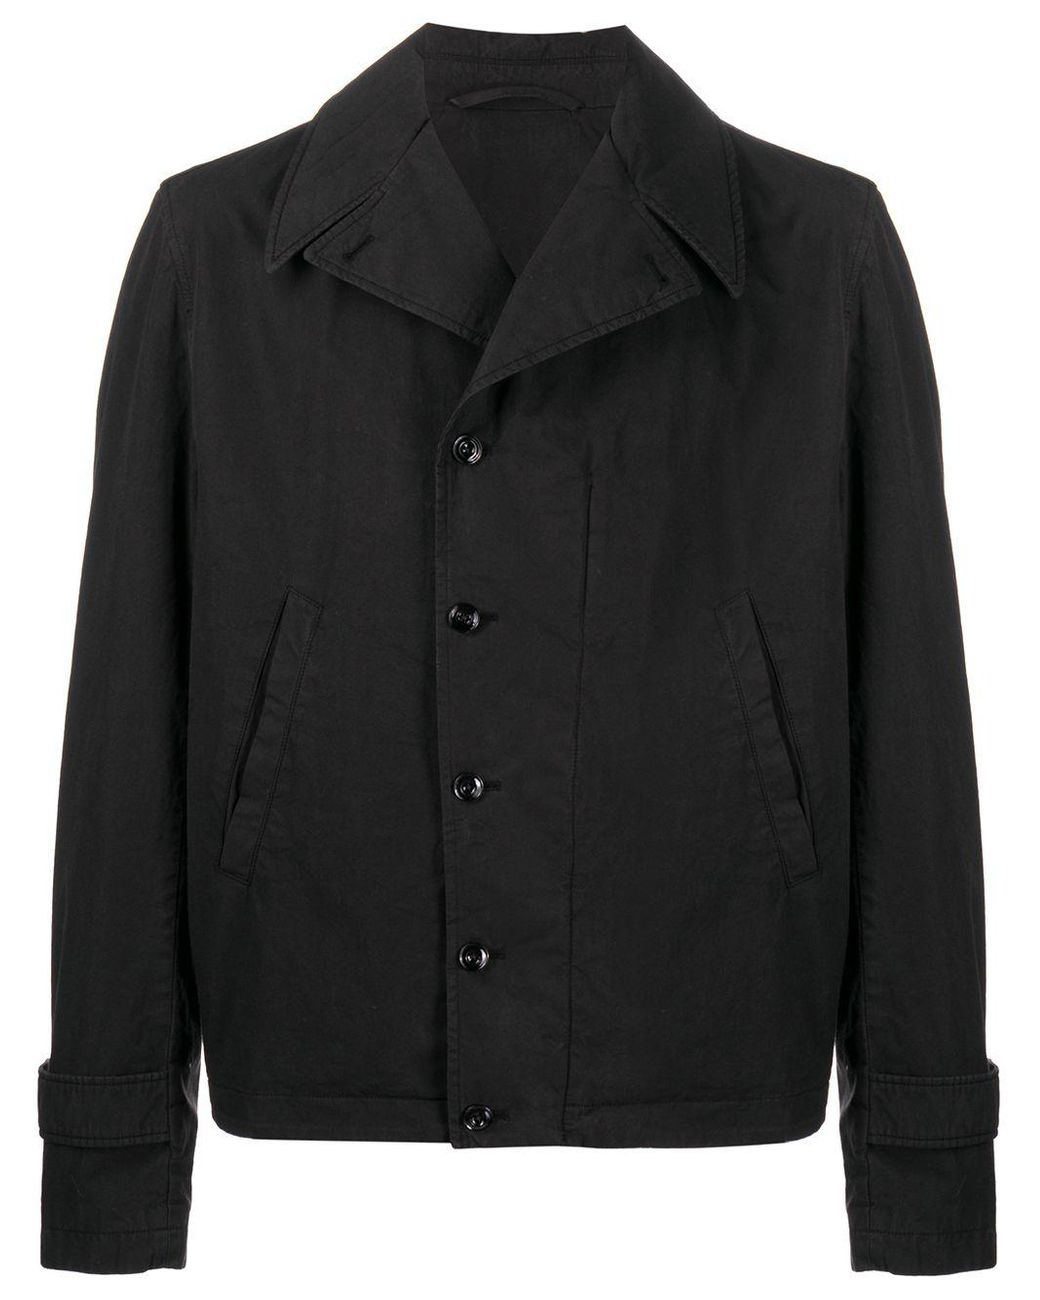 Lemaire Boxy-fit Cotton Jacket in Black for Men - Lyst